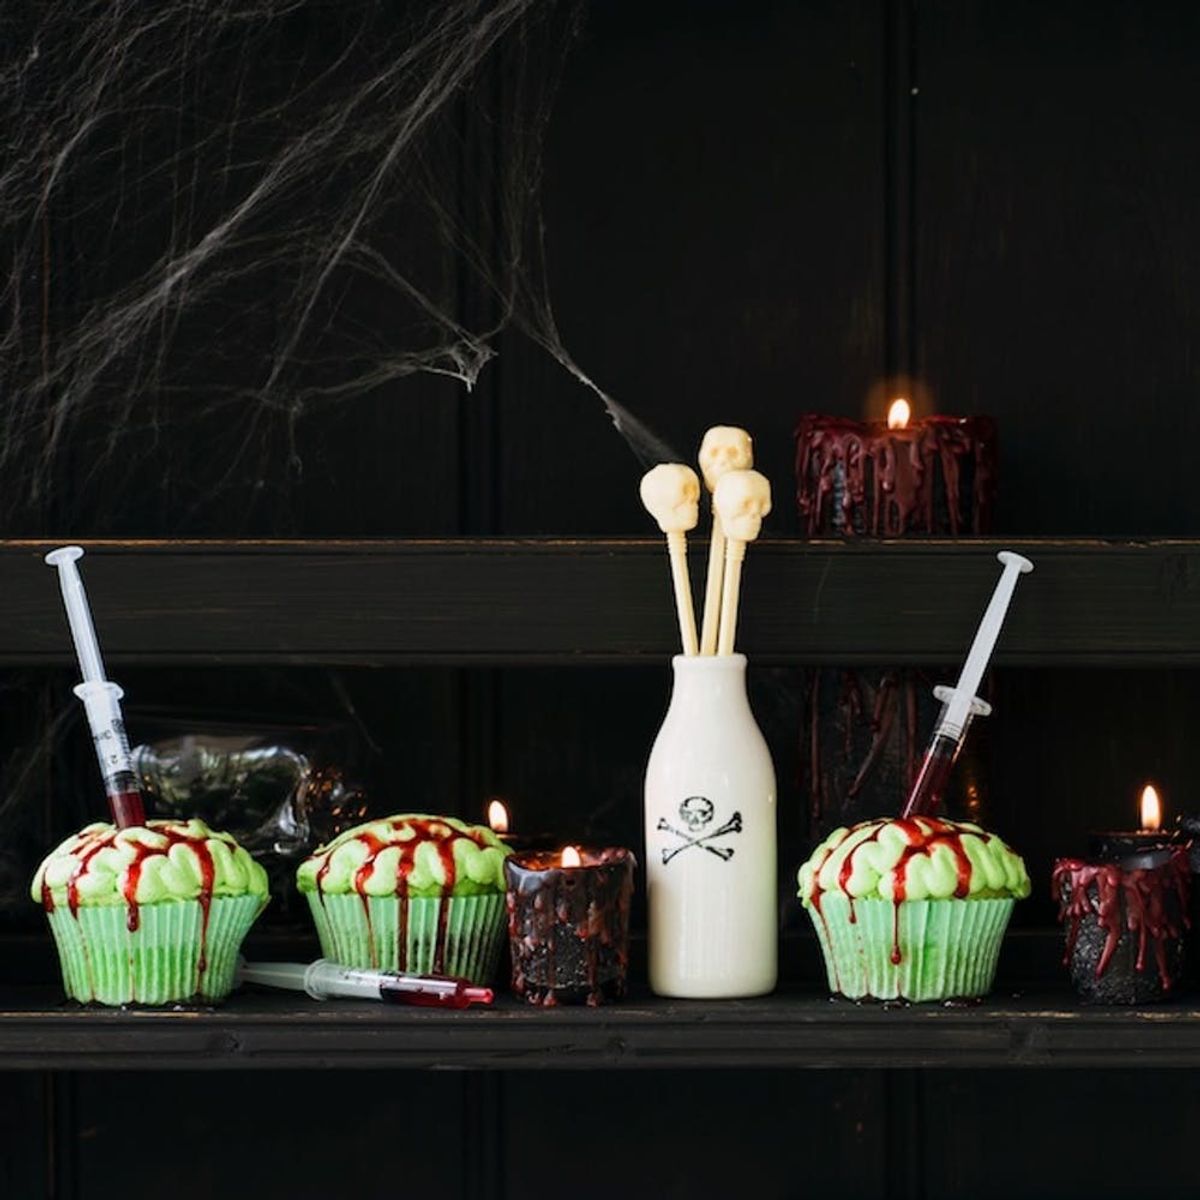 Make These Zombie Brain Cupcakes to Freak Out Your Halloween Guests